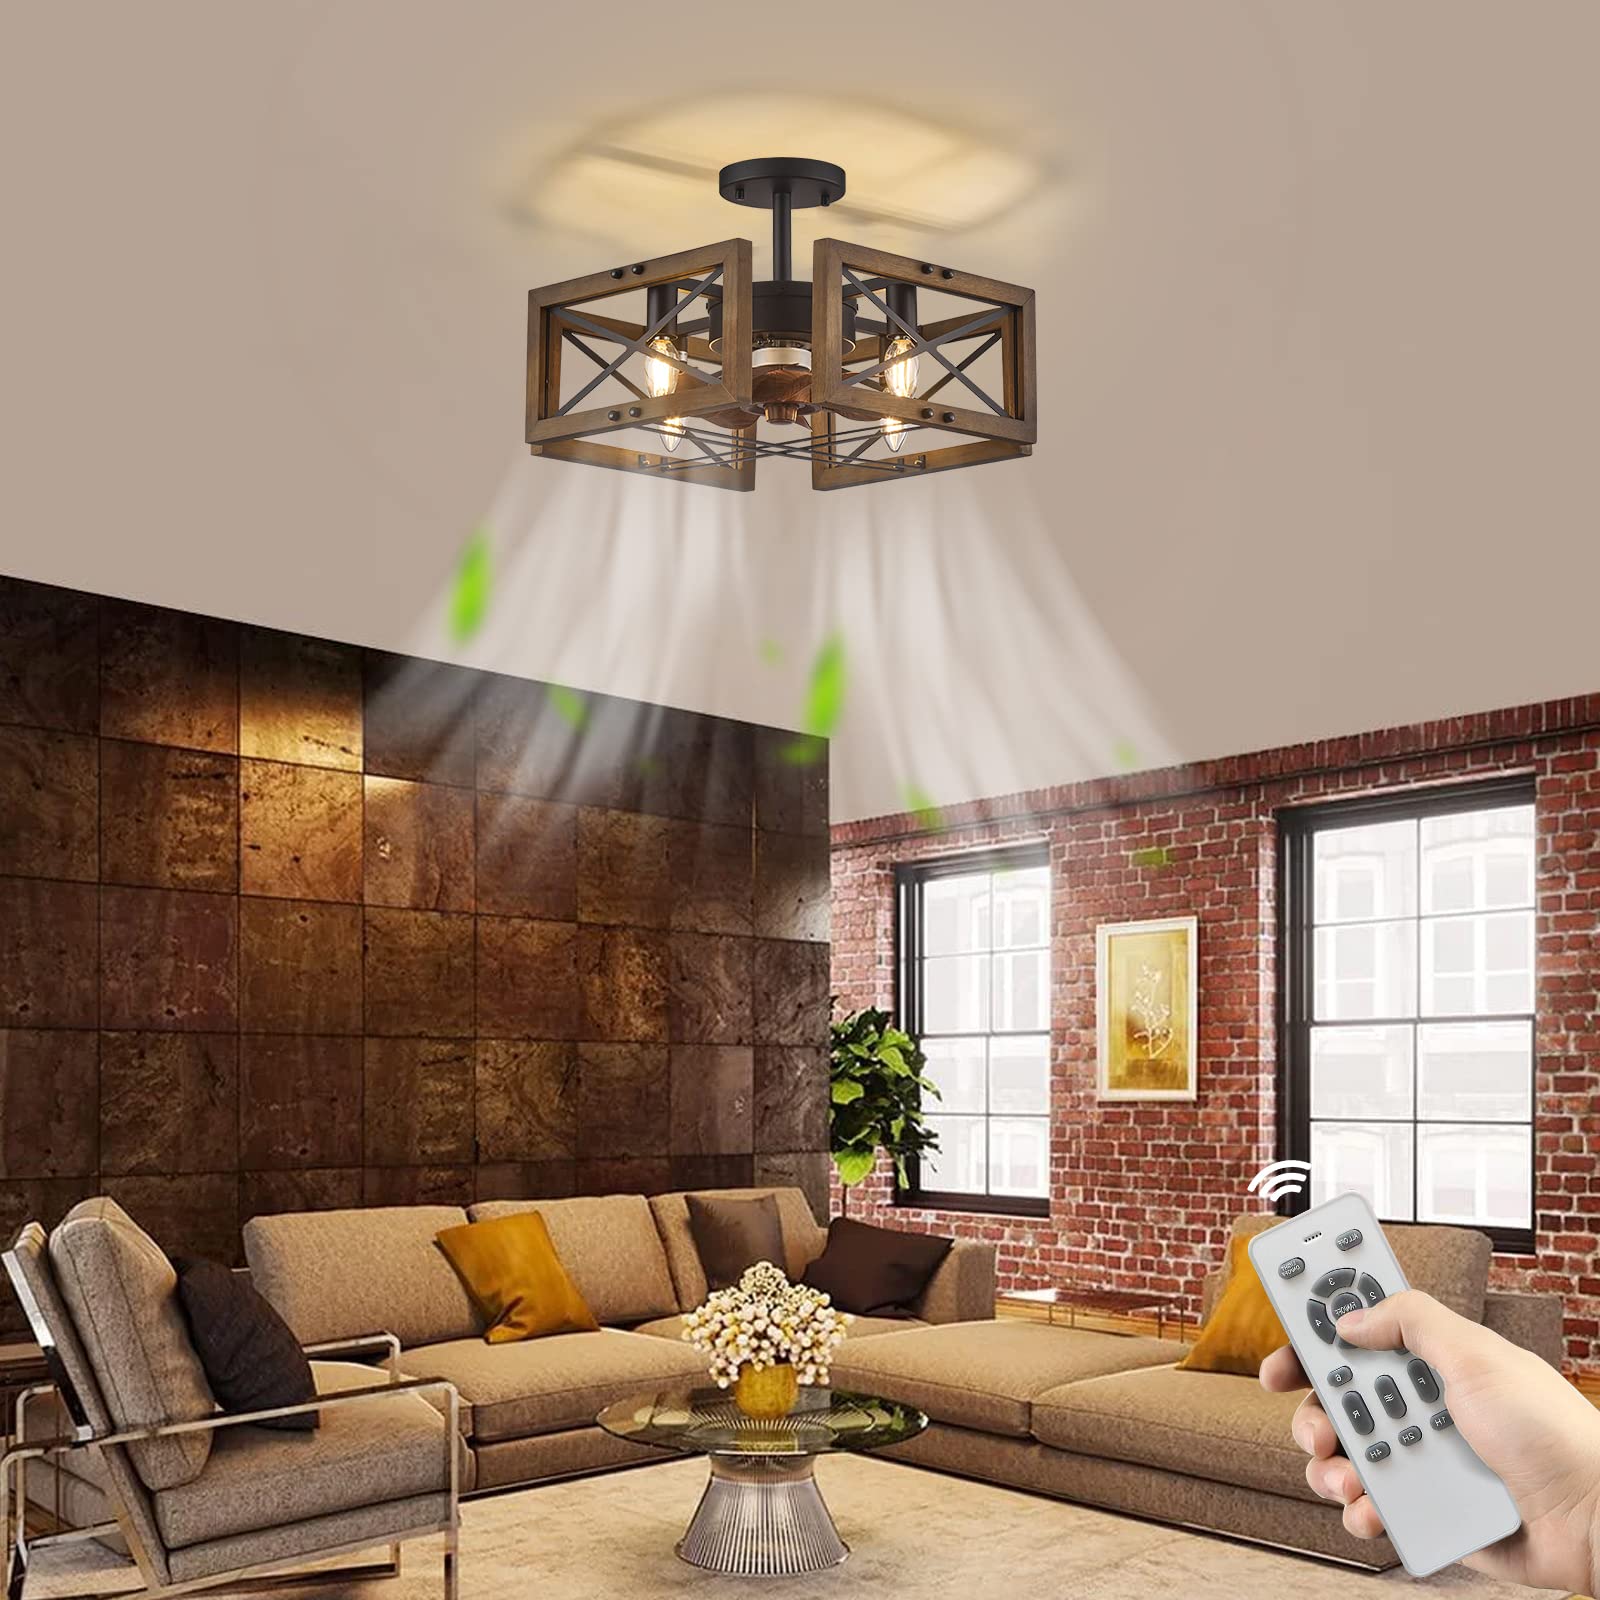 DUJAHMLAND Farmhouse Flush Mount Ceiling Fan with Light, 20 Inch Industry Wood Low Profile Ceiling Fan with Light Remote Control for Bedroom Living Room Kitchen (Antique Wood 4-Light)